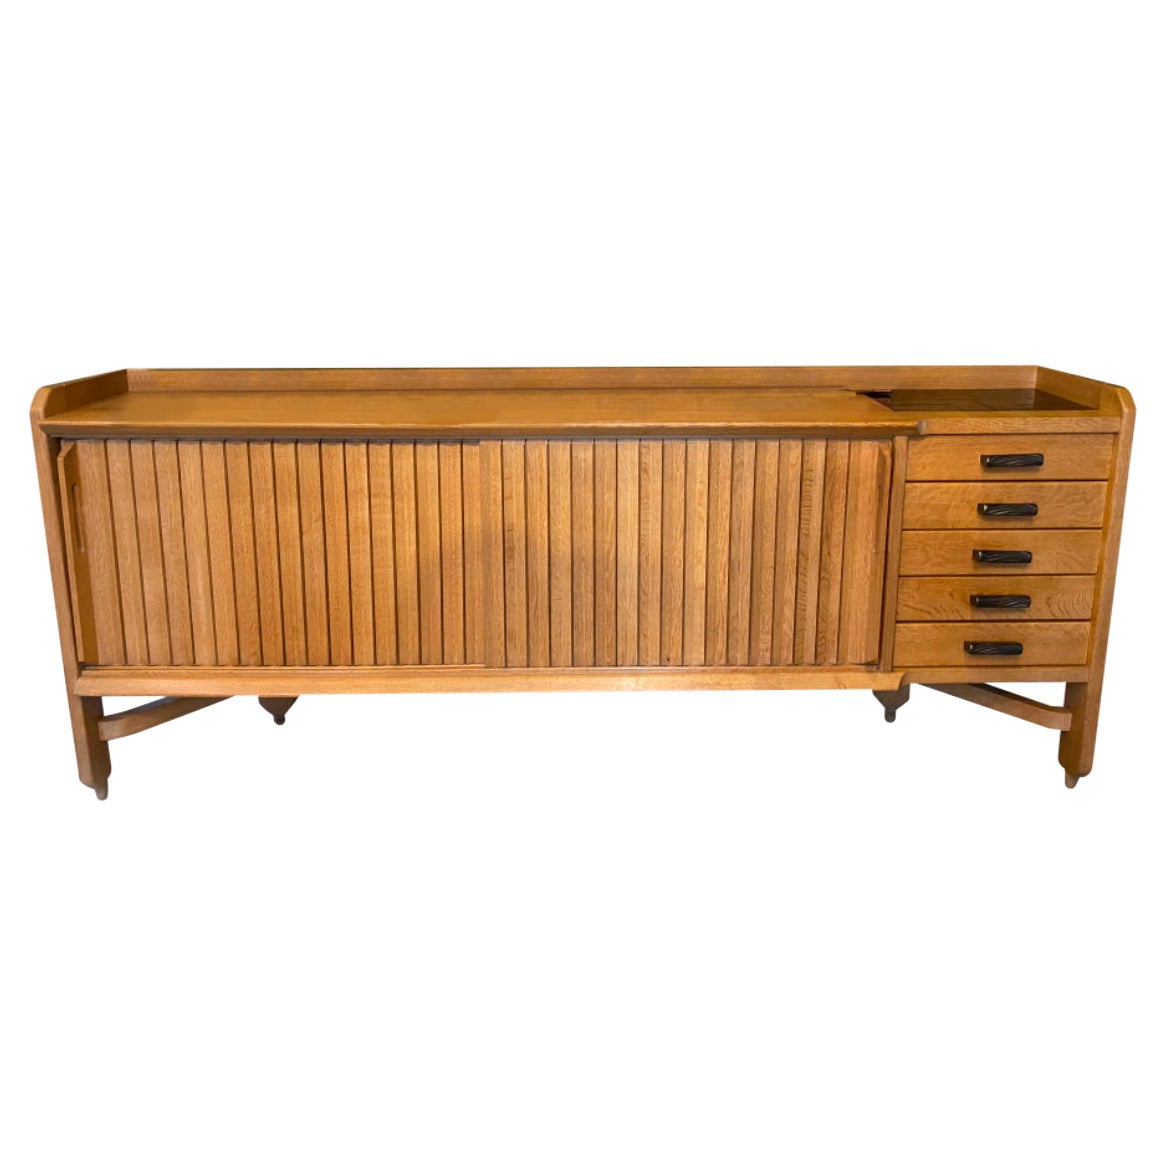 Oak and Tile Sideboard by Guillerme et Chambron, France, 1950's